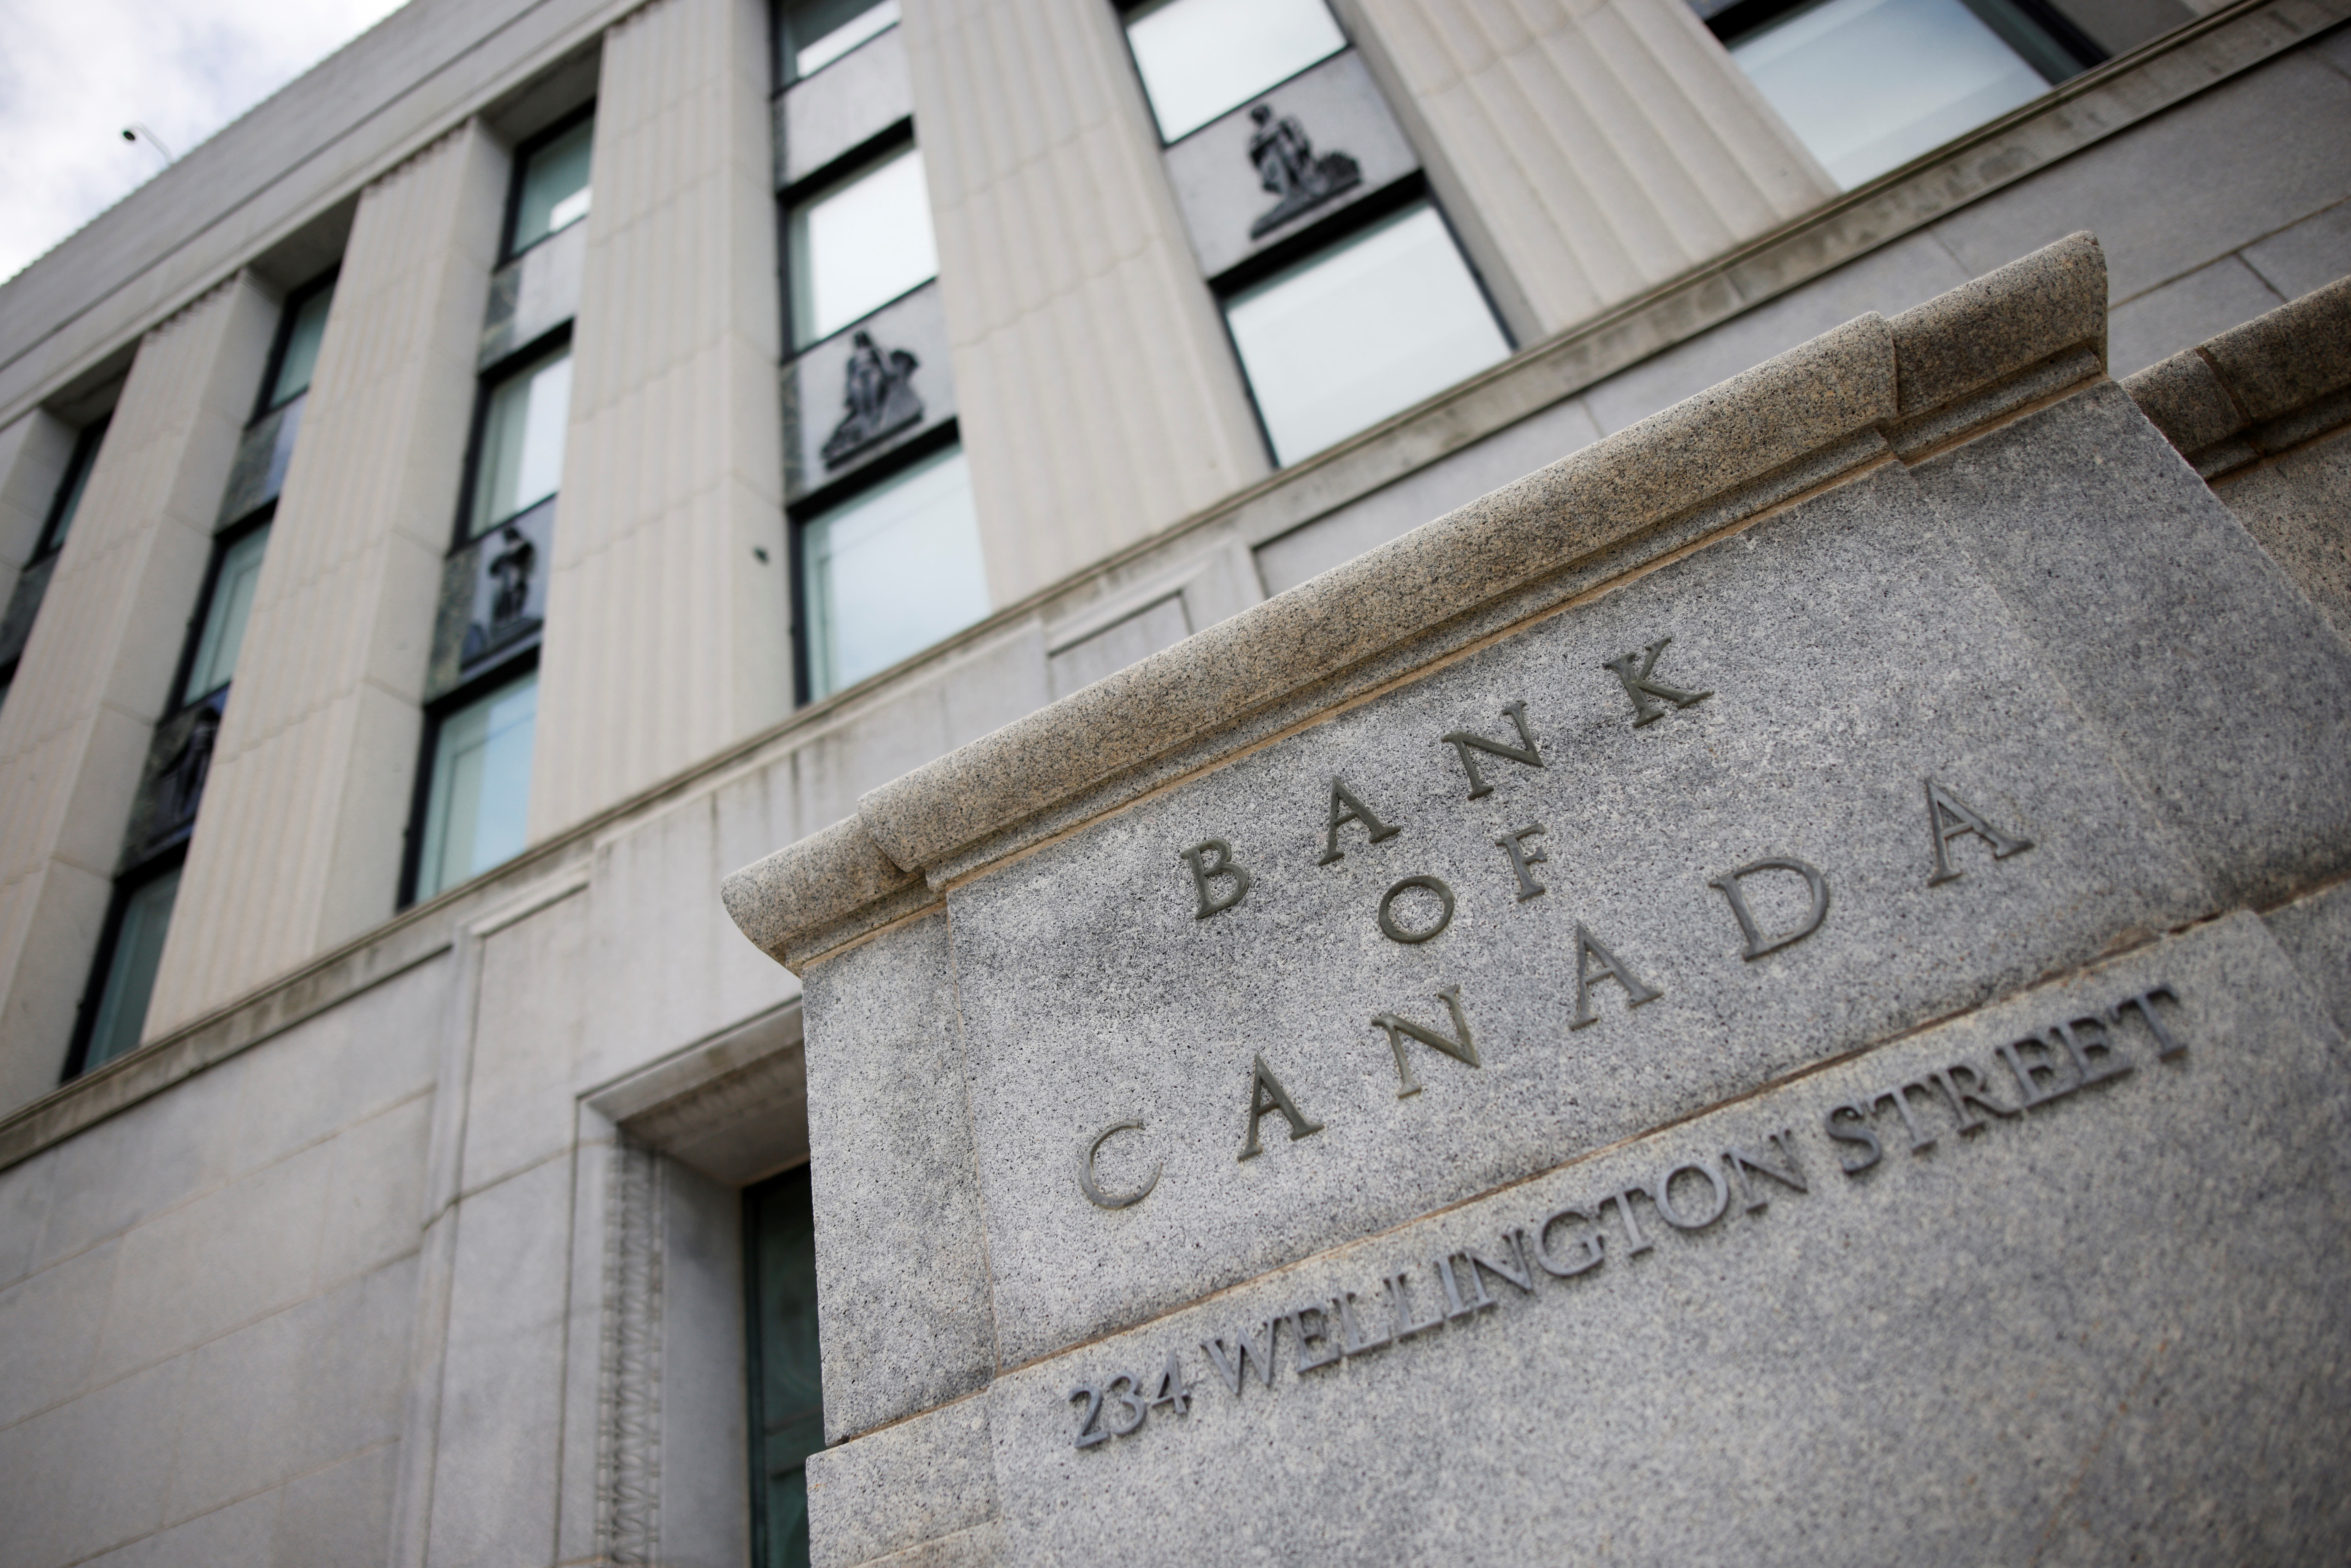 Bank of Canada expected to cut interest rates this morning - Here's what you need to know ahead of the announcement